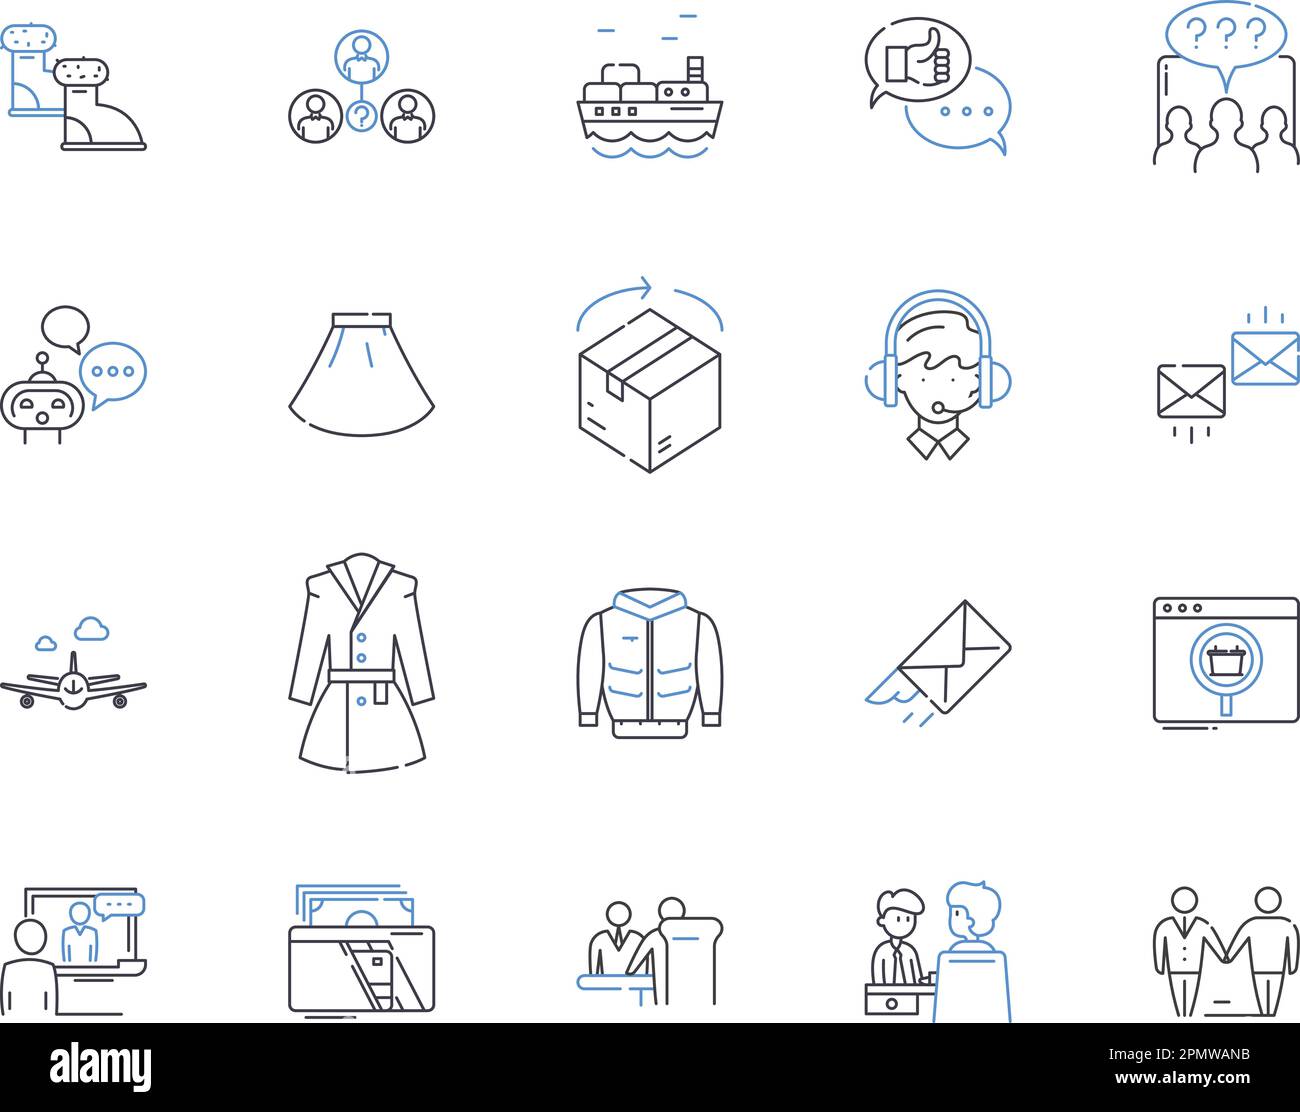 Customer and market outline icons collection. Customers, Market, Analysis, Loyalty, Satisfaction, Insight, Segmentation vector and illustration Stock Vector